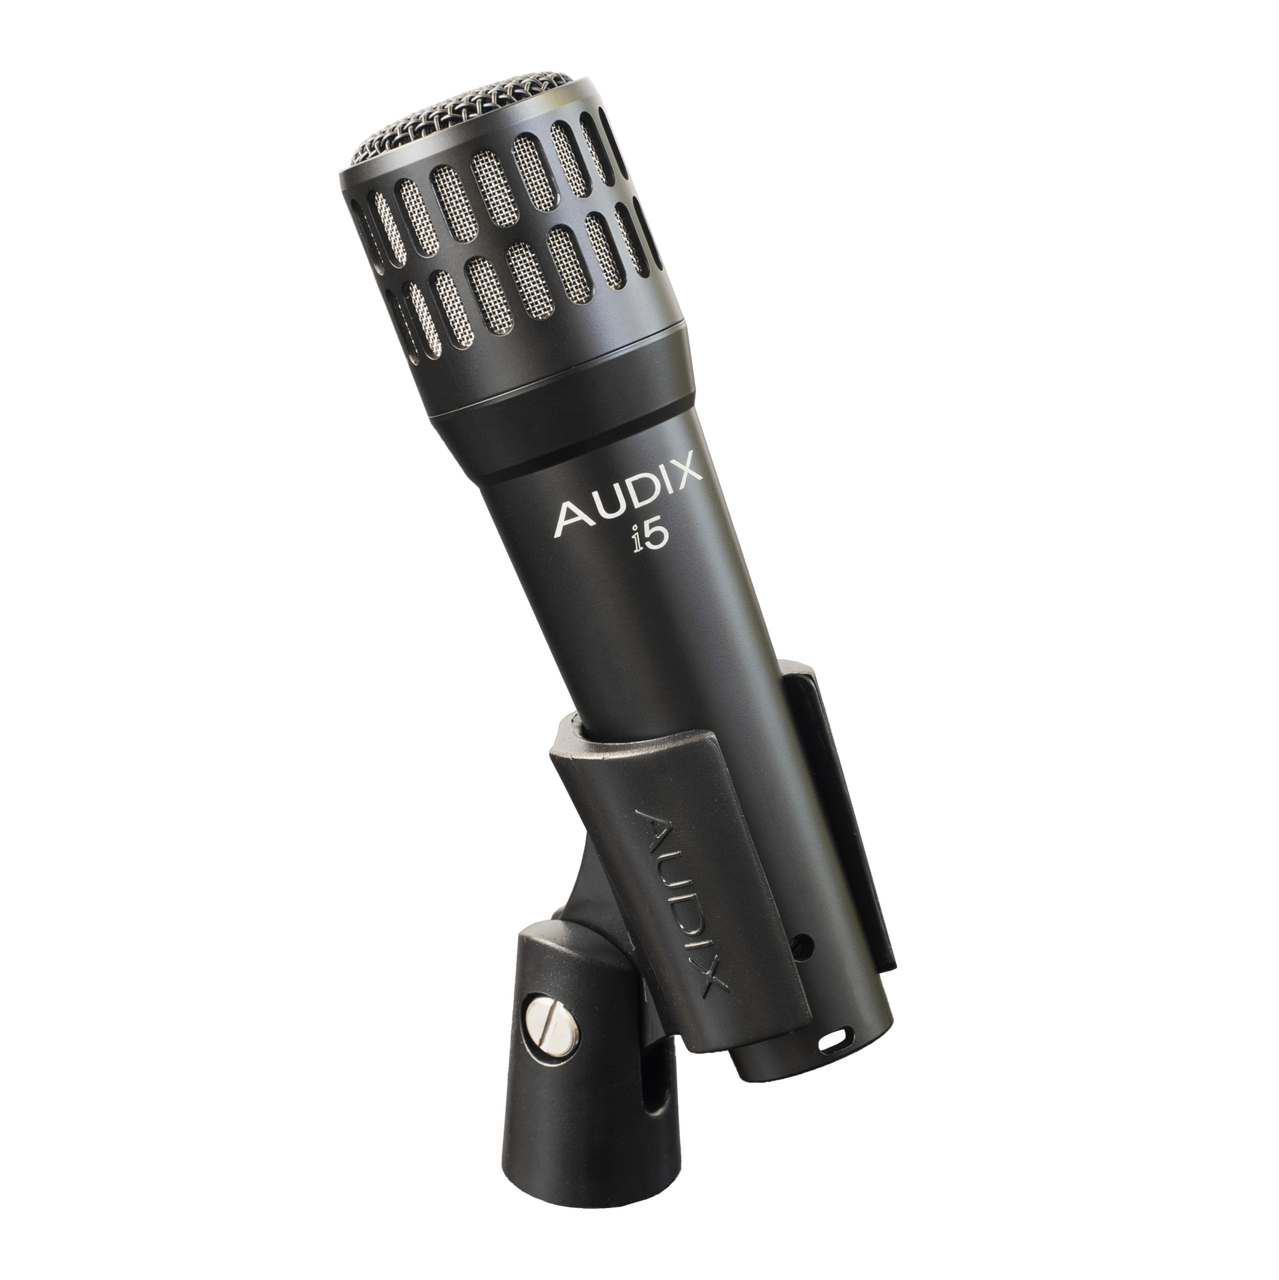 Audix I5 All-Purpose Professional Dynamic Instrument Microphone